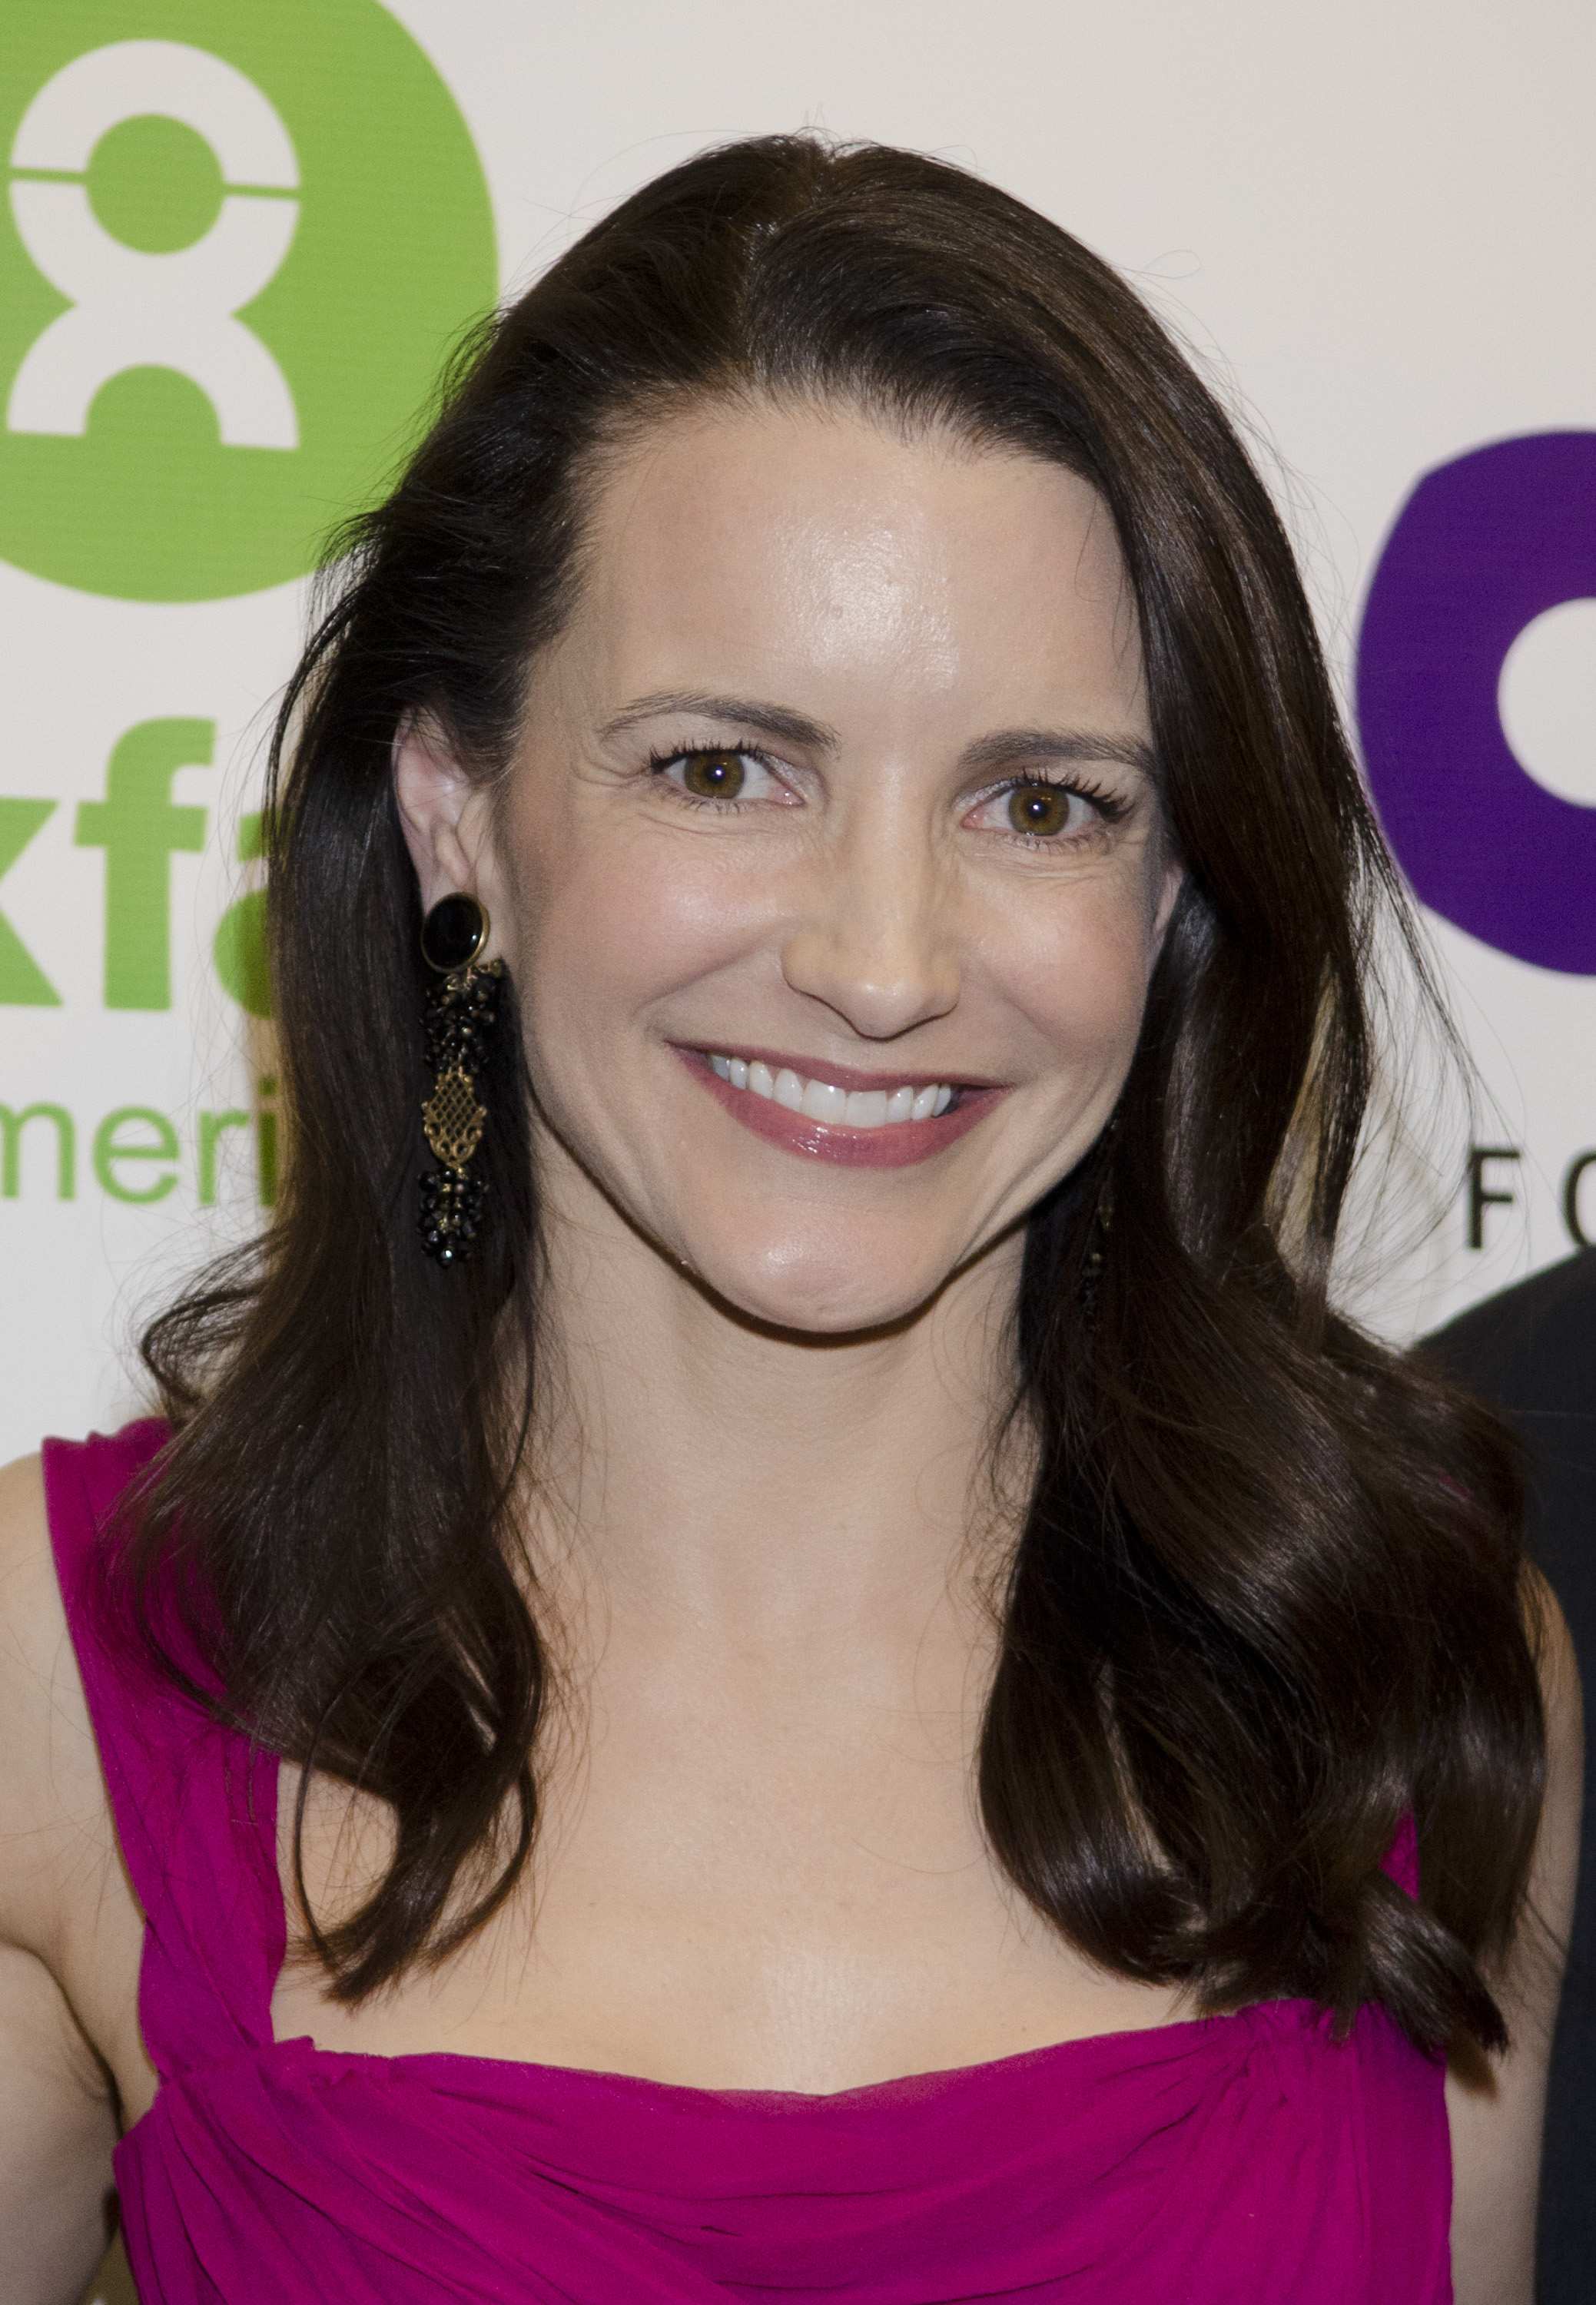 Kristin Davis during the Oxfam Sisters on the Planet Summit awards ceremony at the Rayburn House Office Building on March 7, 2012 in Washington, DC. | Source: Getty Images